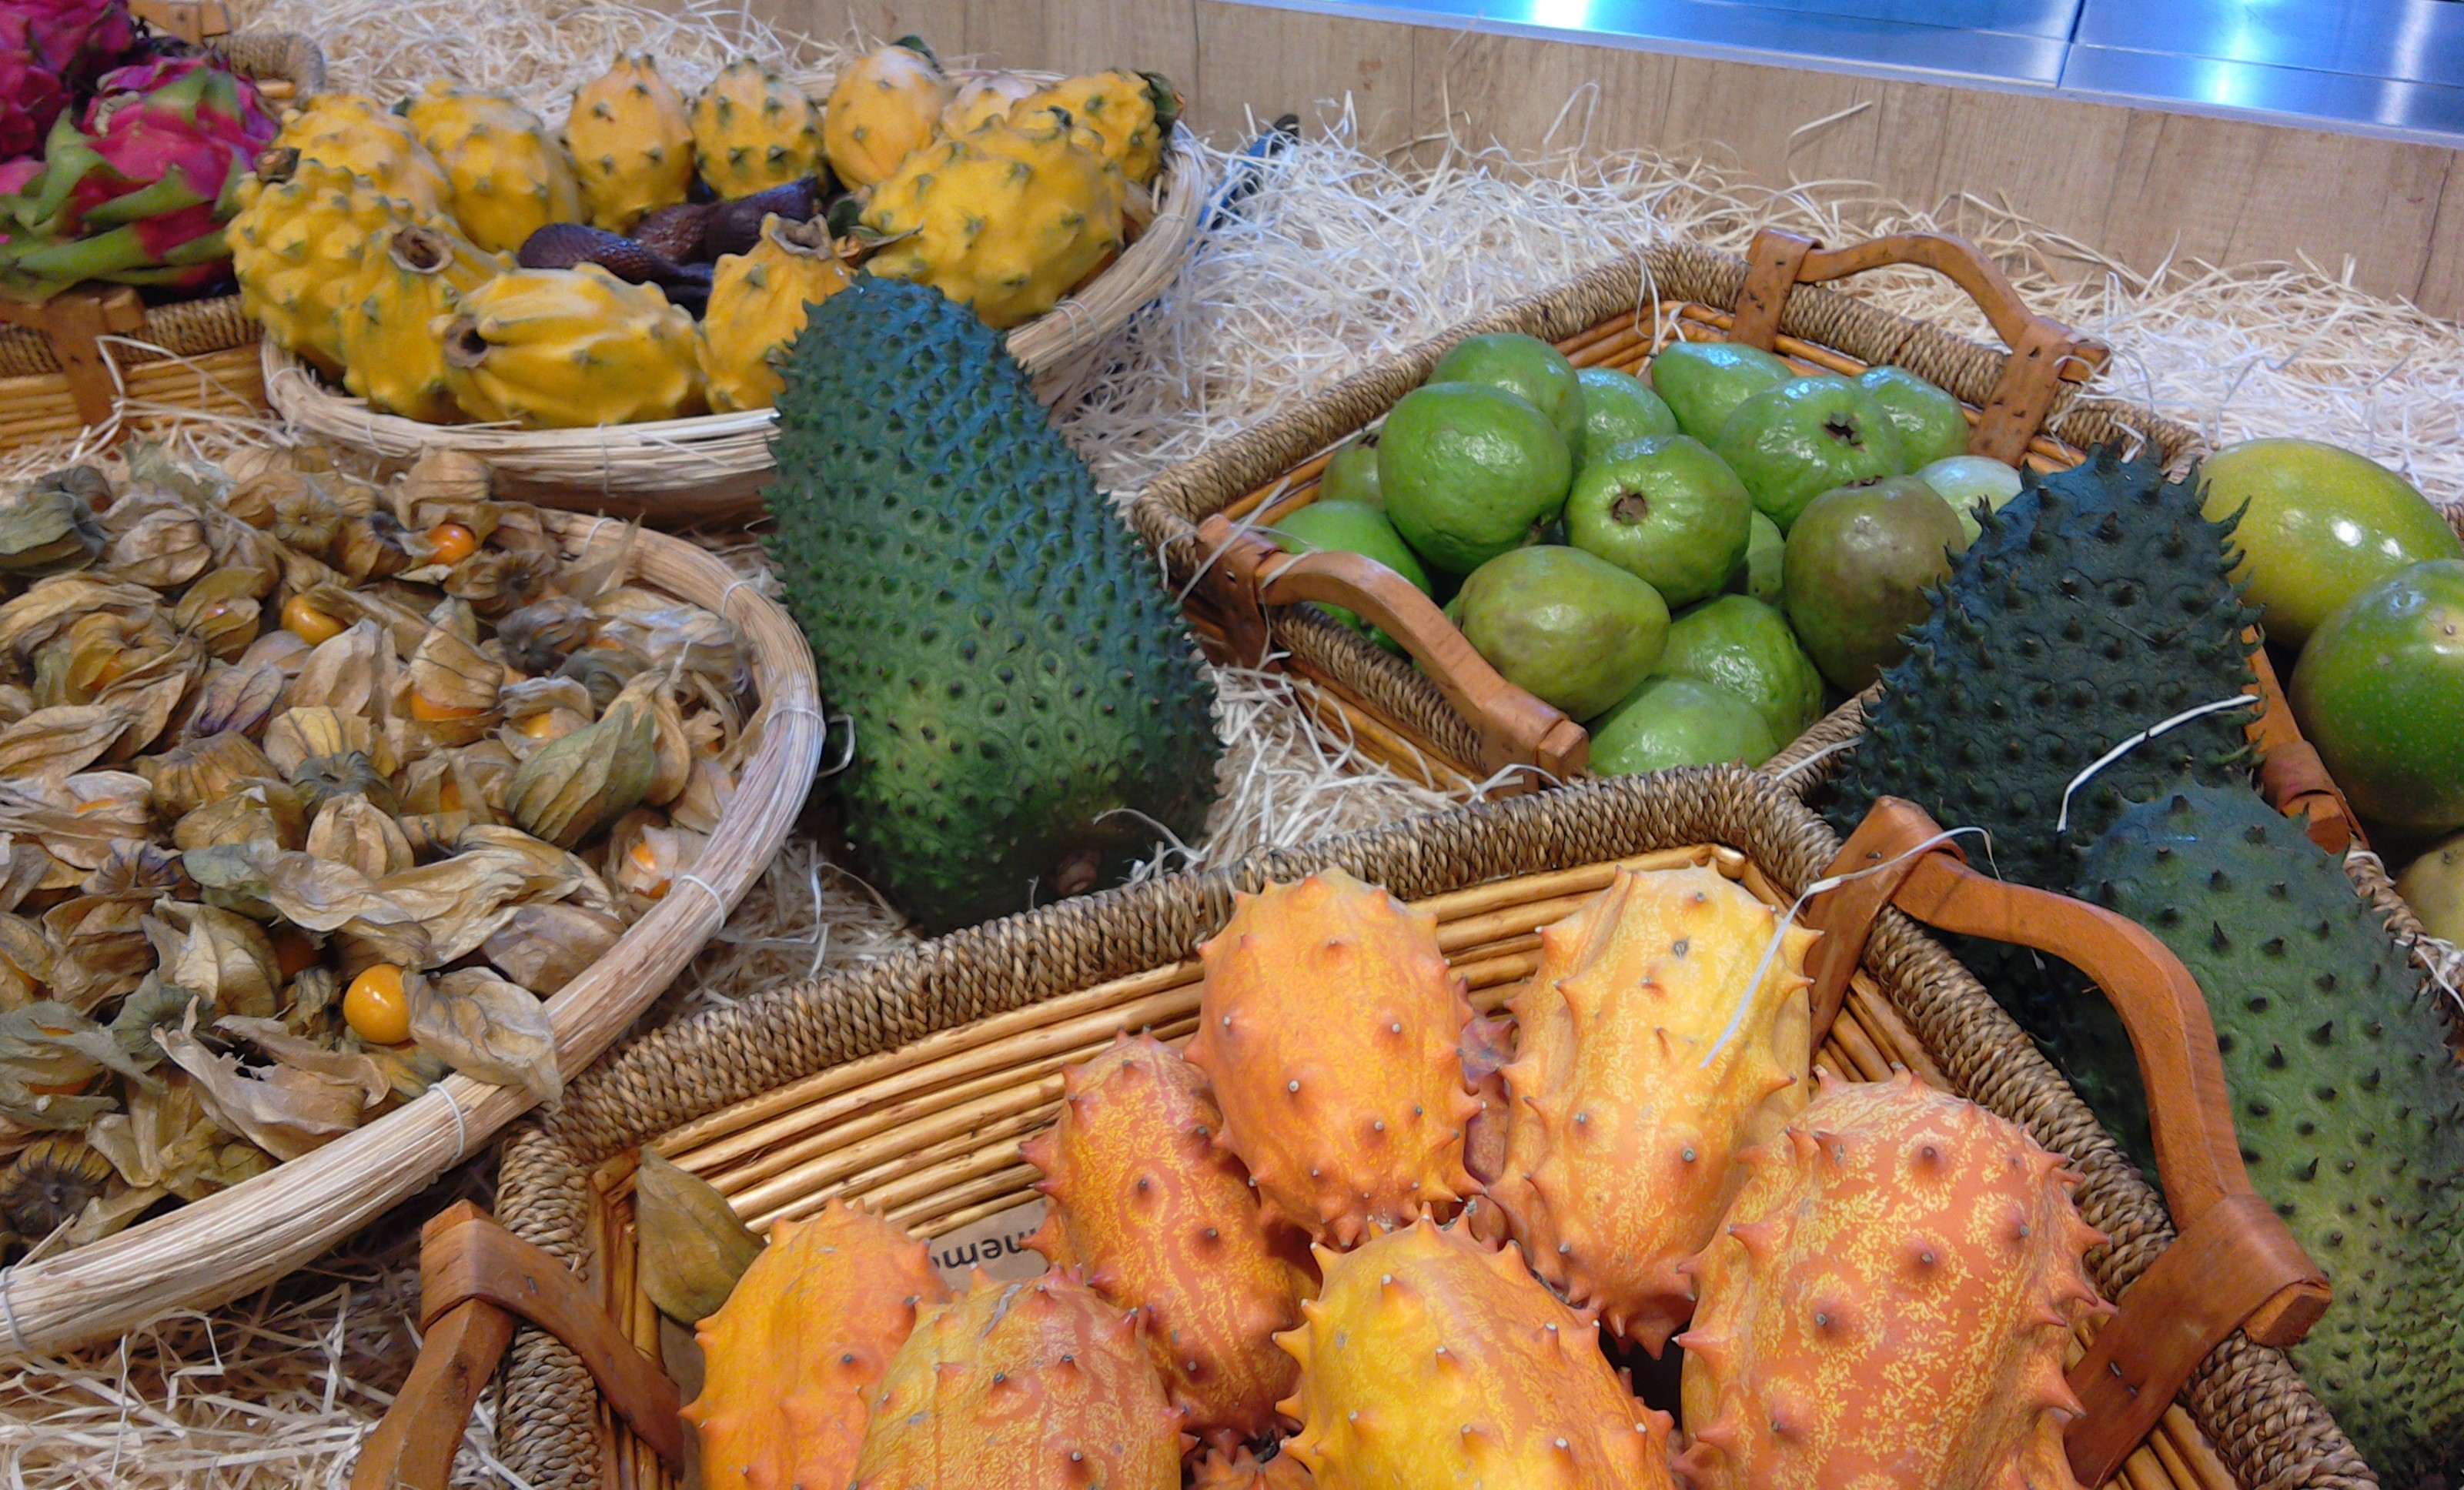 Exotic fruits for sale at Grand Frais, Caen, Normandy